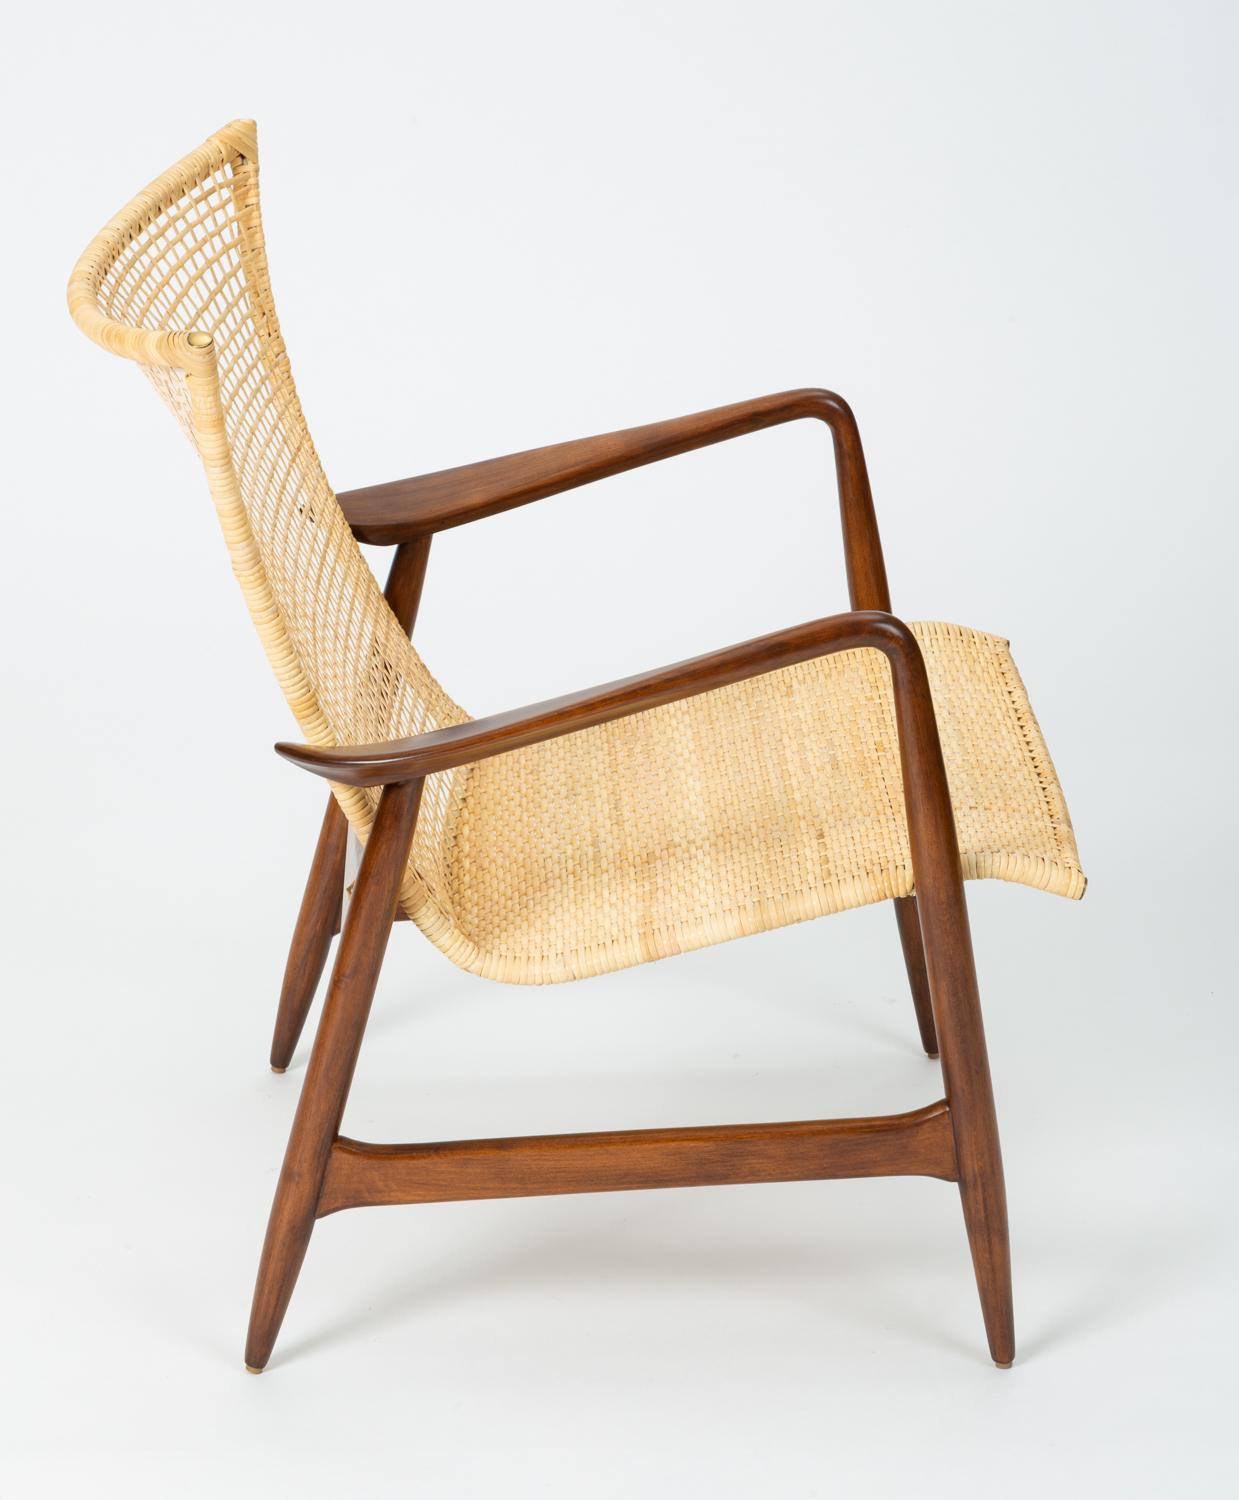 Steel Lounge Chair with Cane Seat by Ib Kofod-Larsen for Selig